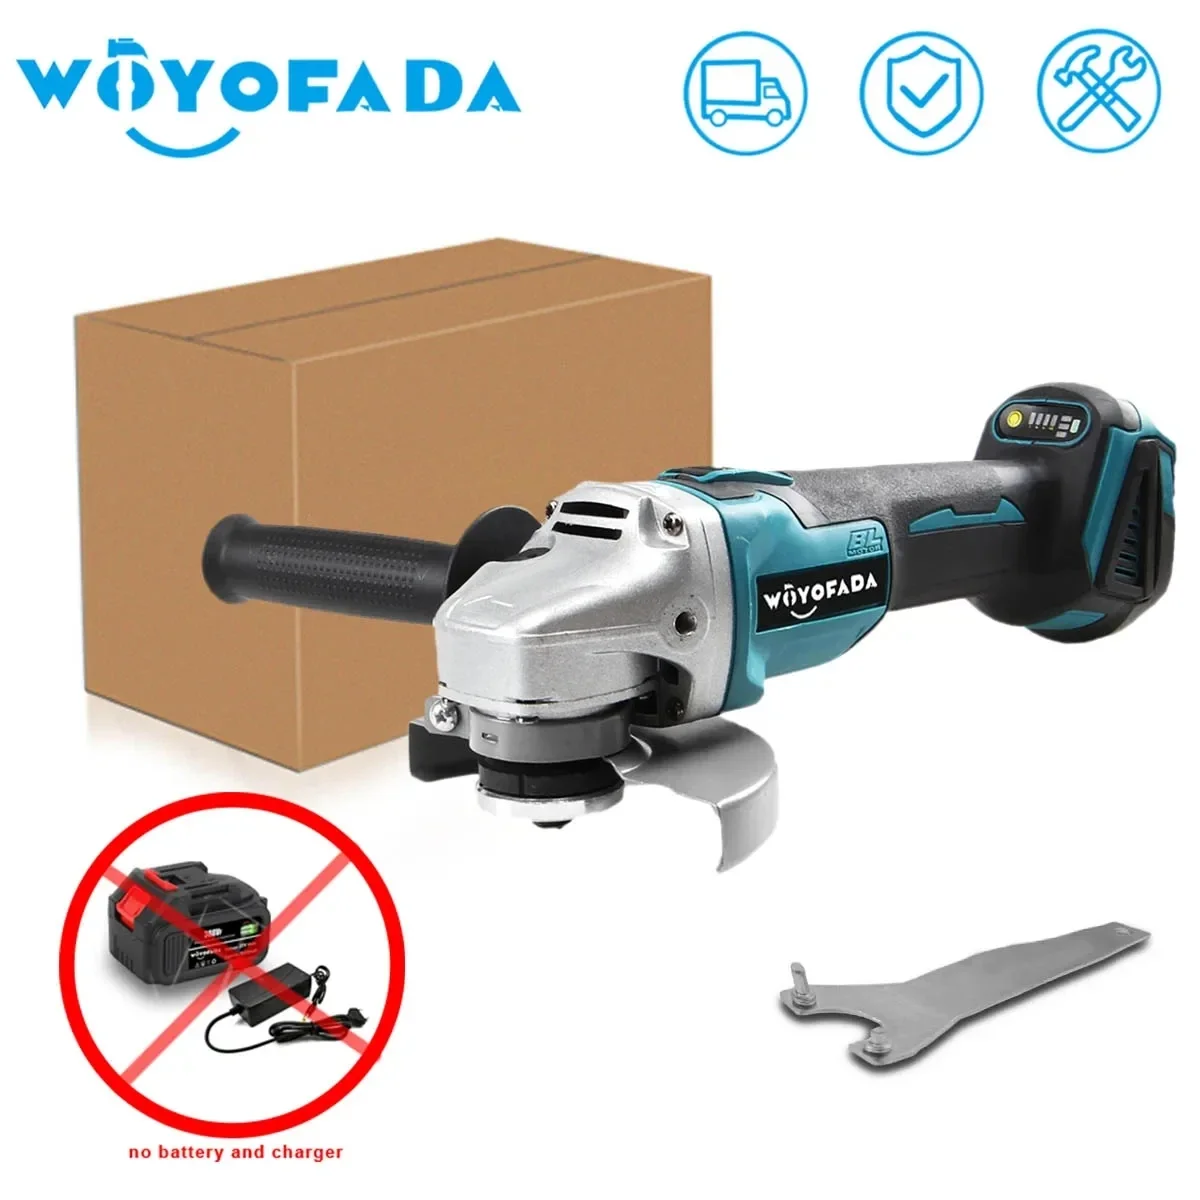 WOYOFADA 125/100mm Brushless Electric Angle Grinder Grinding Machine DIY Woodworking Power Tool Adapt For Makita 18V Battery 1pcs v type welding clamp magnet v type welding jig adjustable adapt for furniture equipment welding clamp hand tool supplies